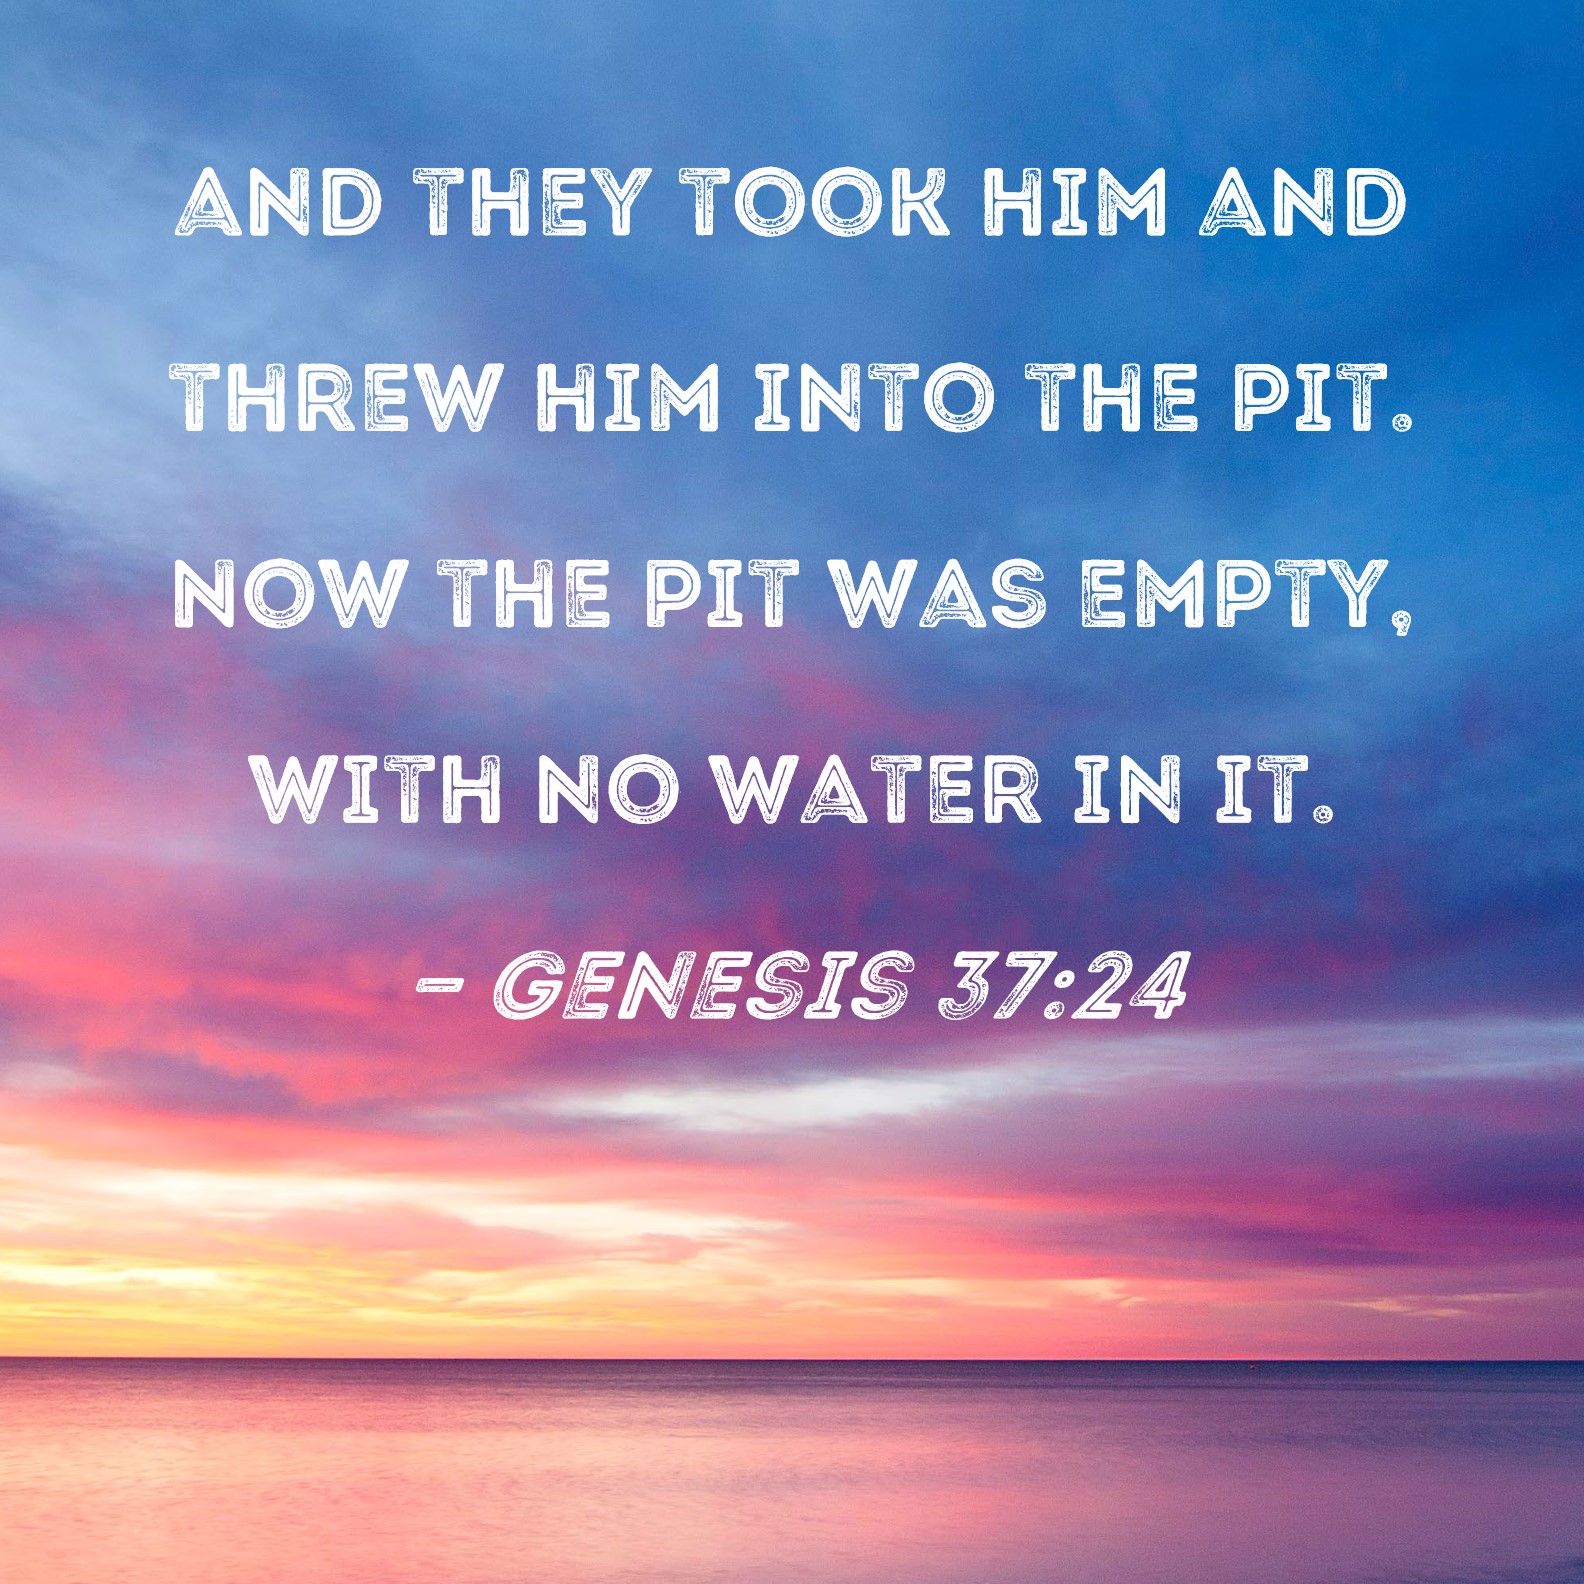 Genesis 37 24 And They Took Him And Threw Him Into The Pit Now The Pit Was Empty With No Water